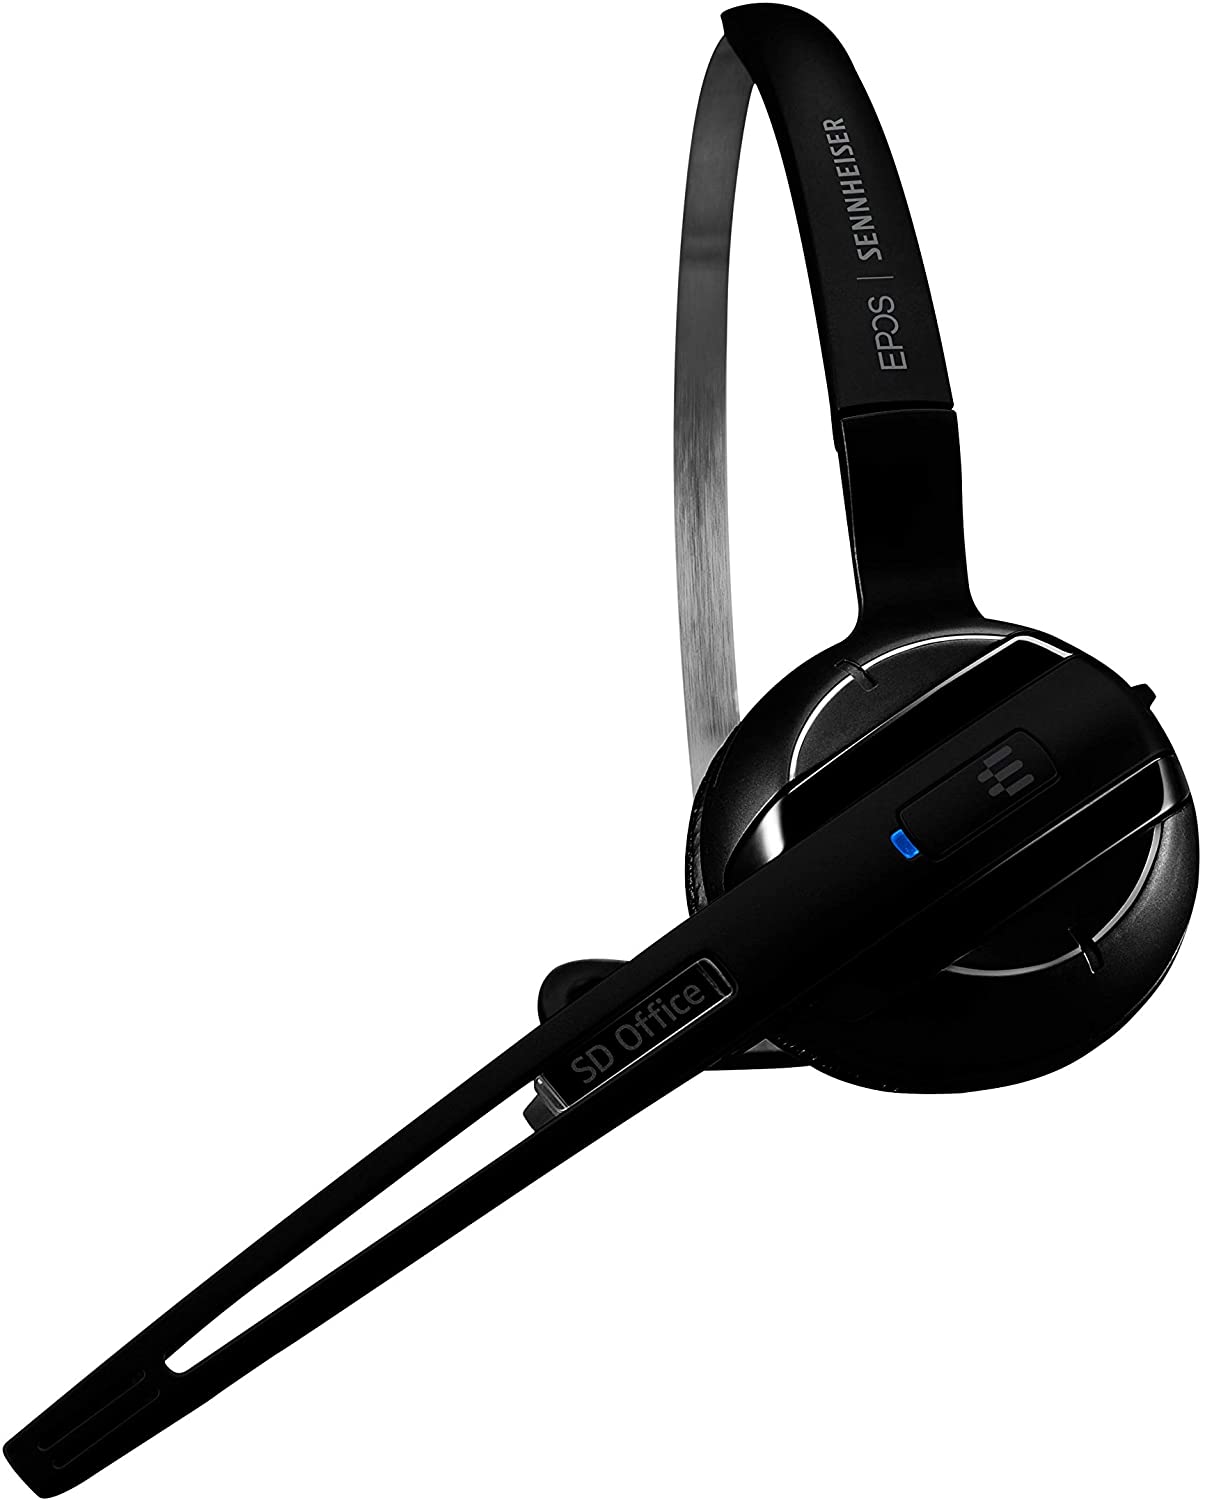 Sennheiser SD Office ML (506009) - Single-Sided DECT Wireless Headset for Desk Phone and Skype for Business Connection, Noise-Cancelling Microphone, Multiple Wearing Styles (Black)